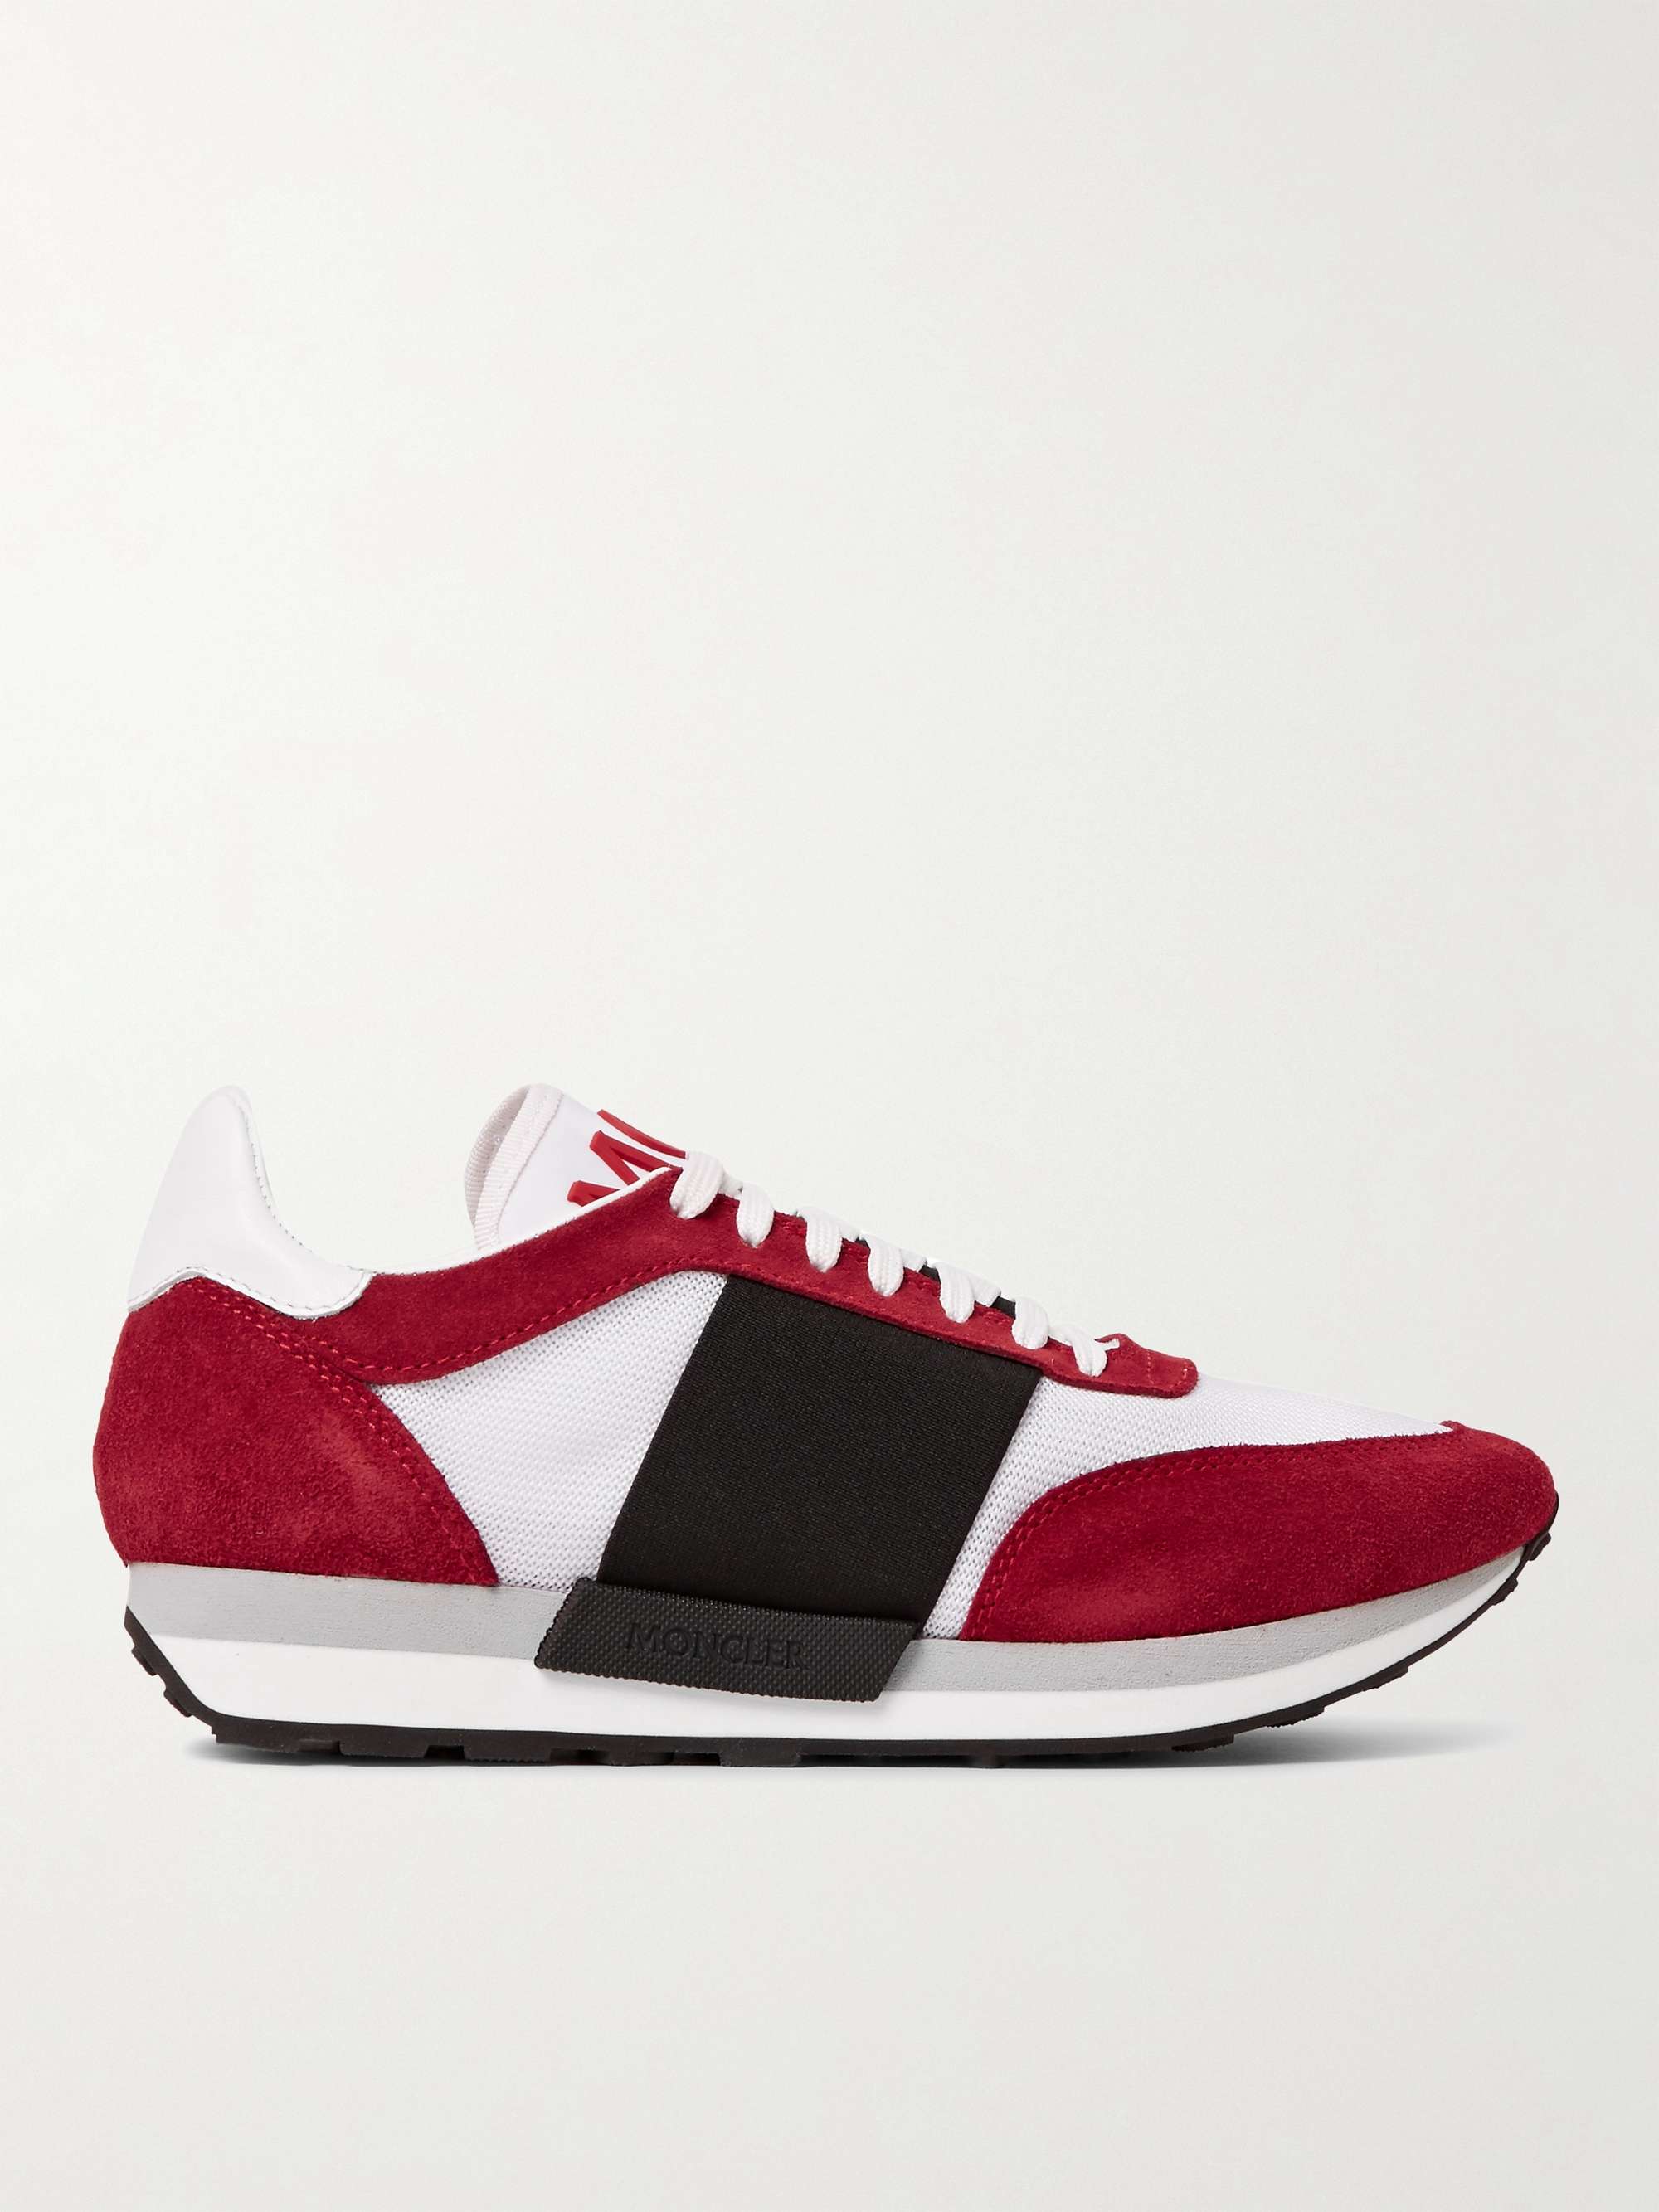 MONCLER Horace Suede And Mesh Sneakers | MR PORTER